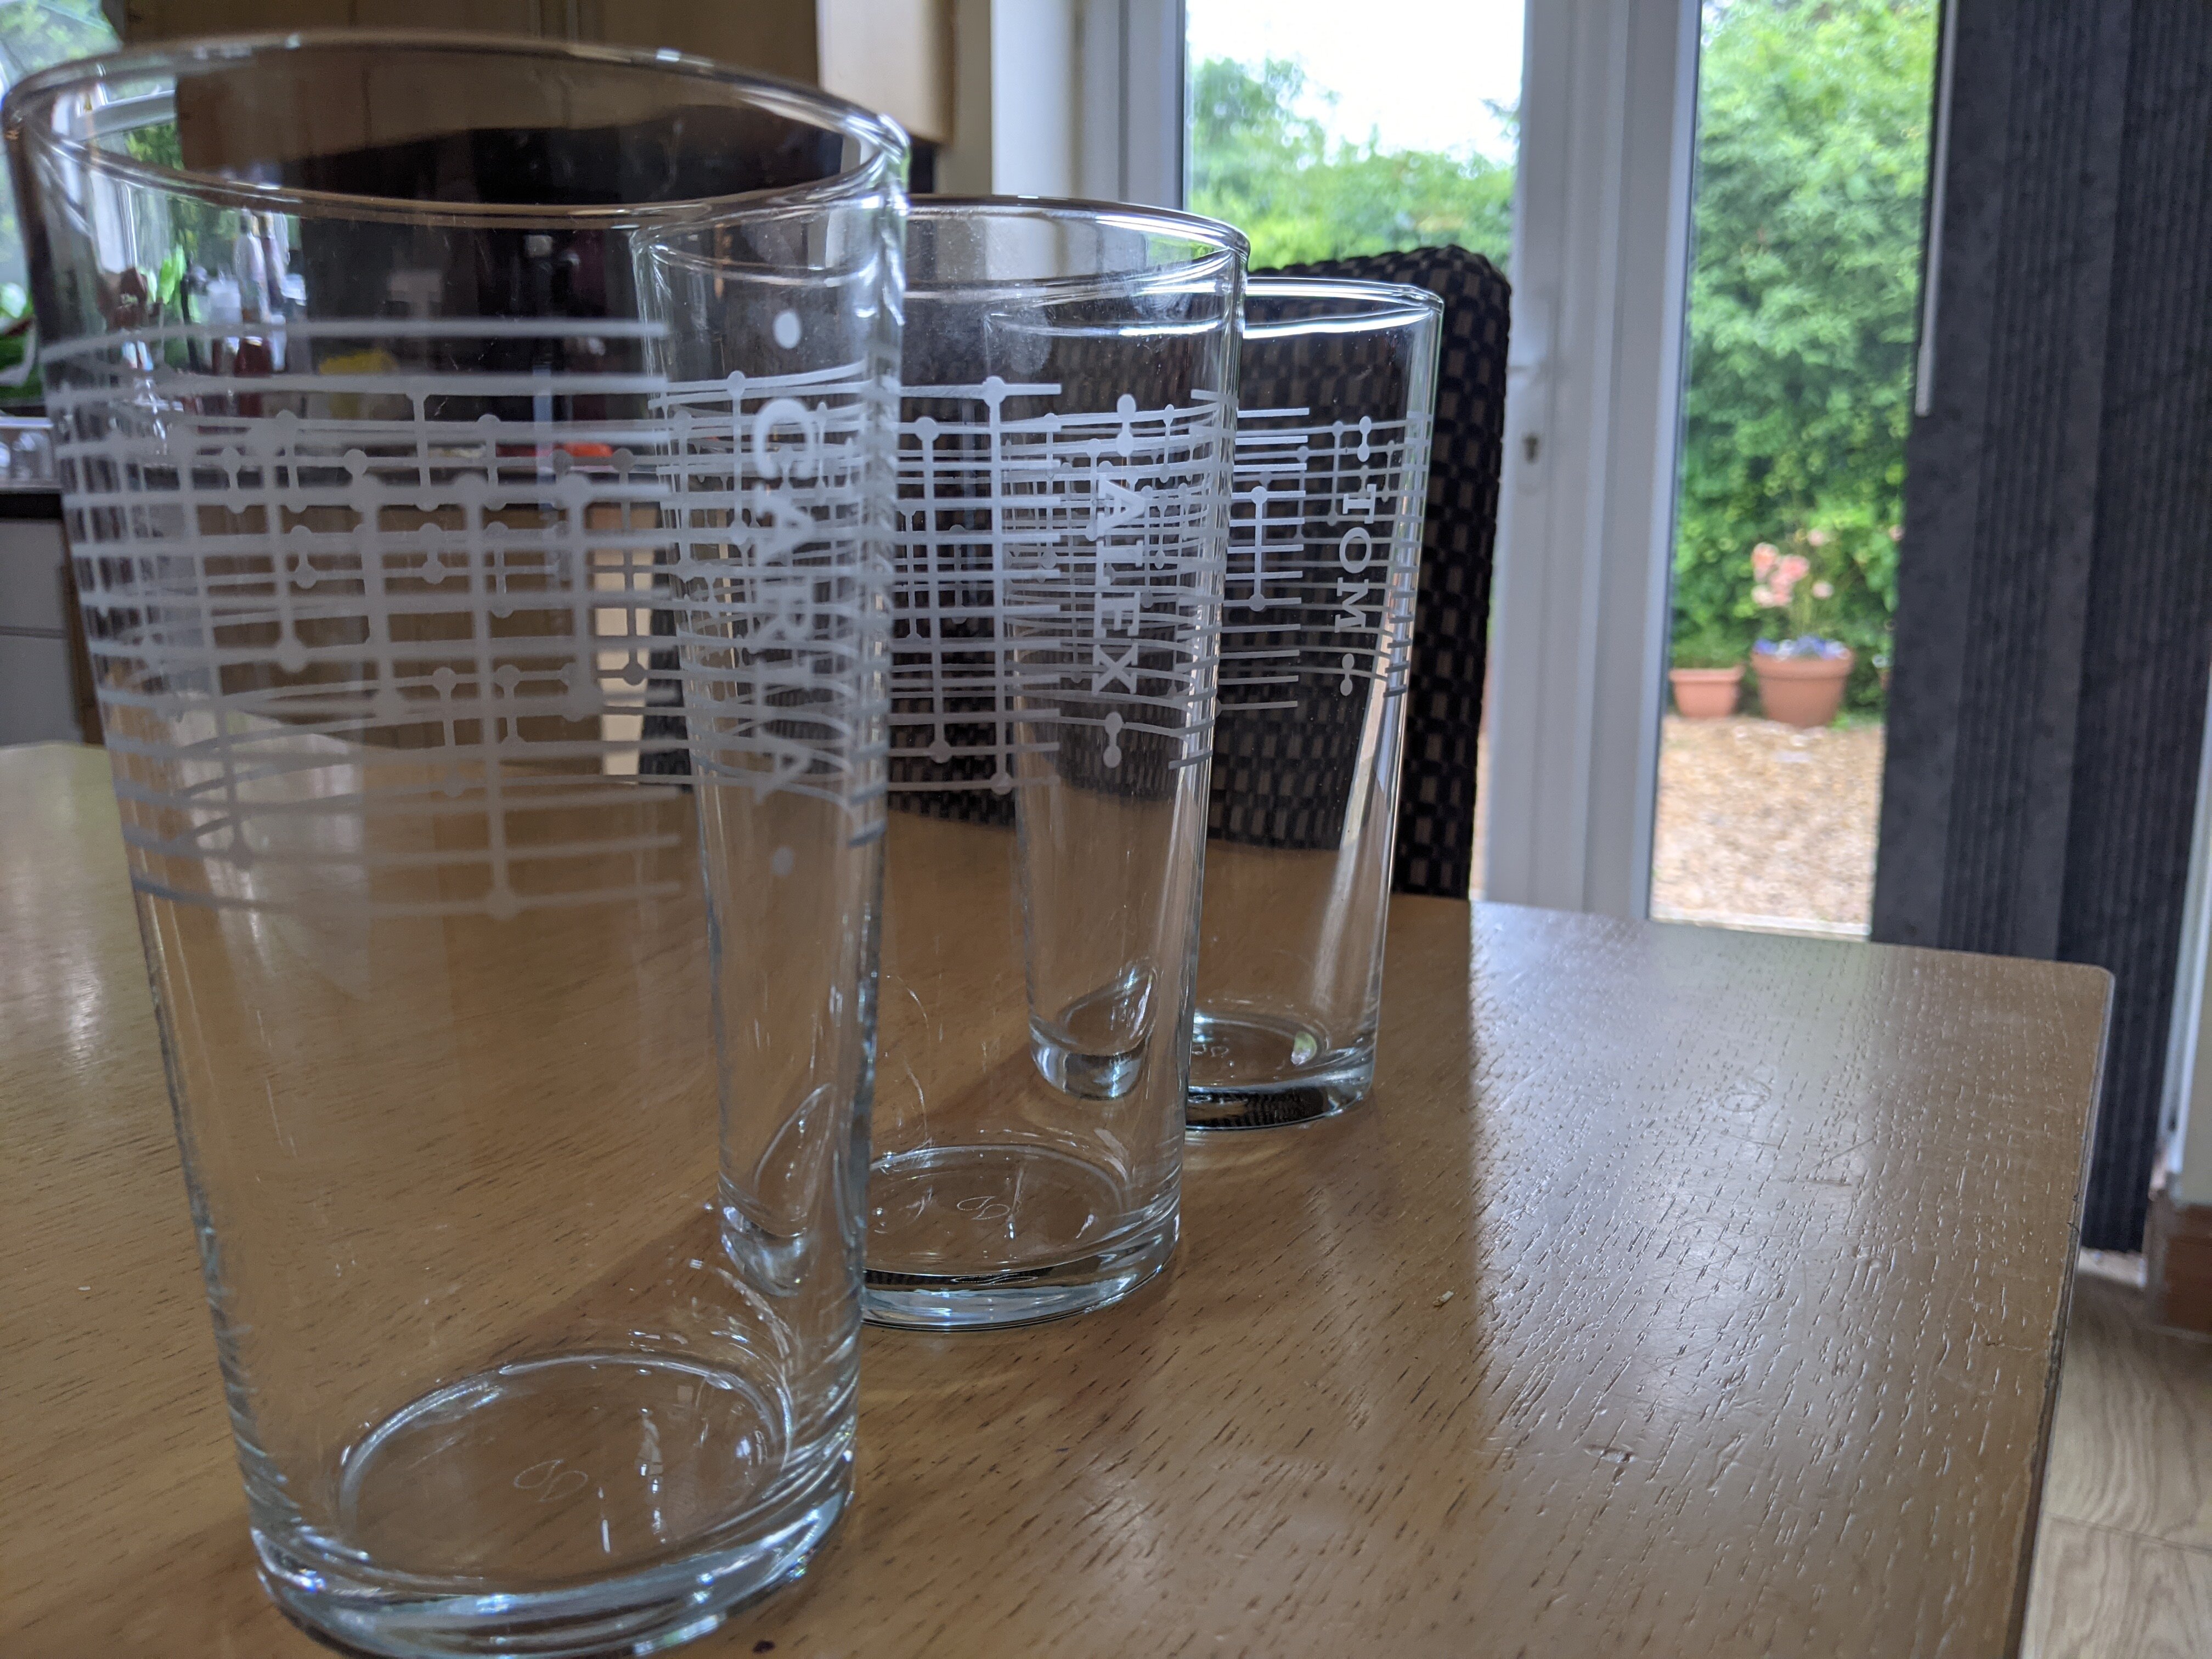 I also made pint glasses for Alex and Carla as souvenirs.